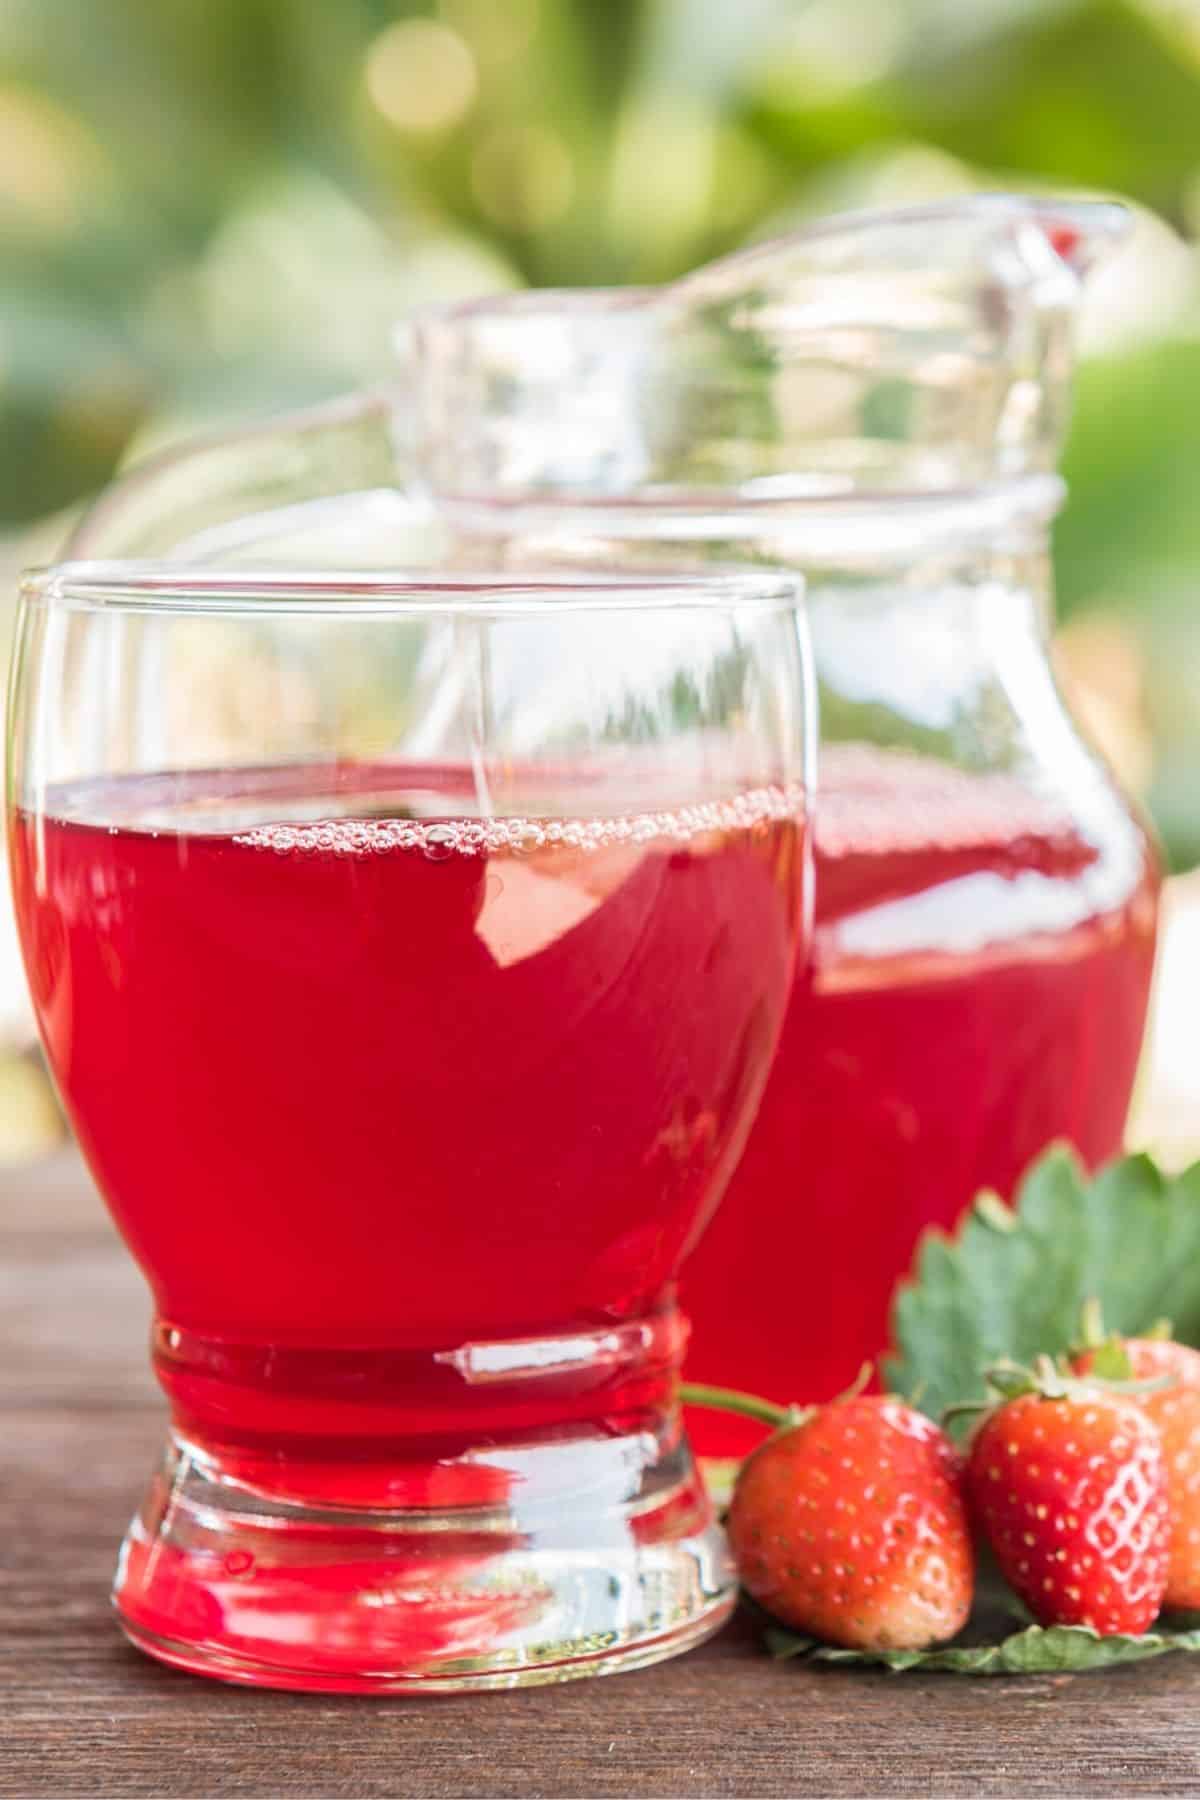 https://www.cleaneatingkitchen.com/wp-content/uploads/2022/05/pitcher-of-strawberry-juice.jpg